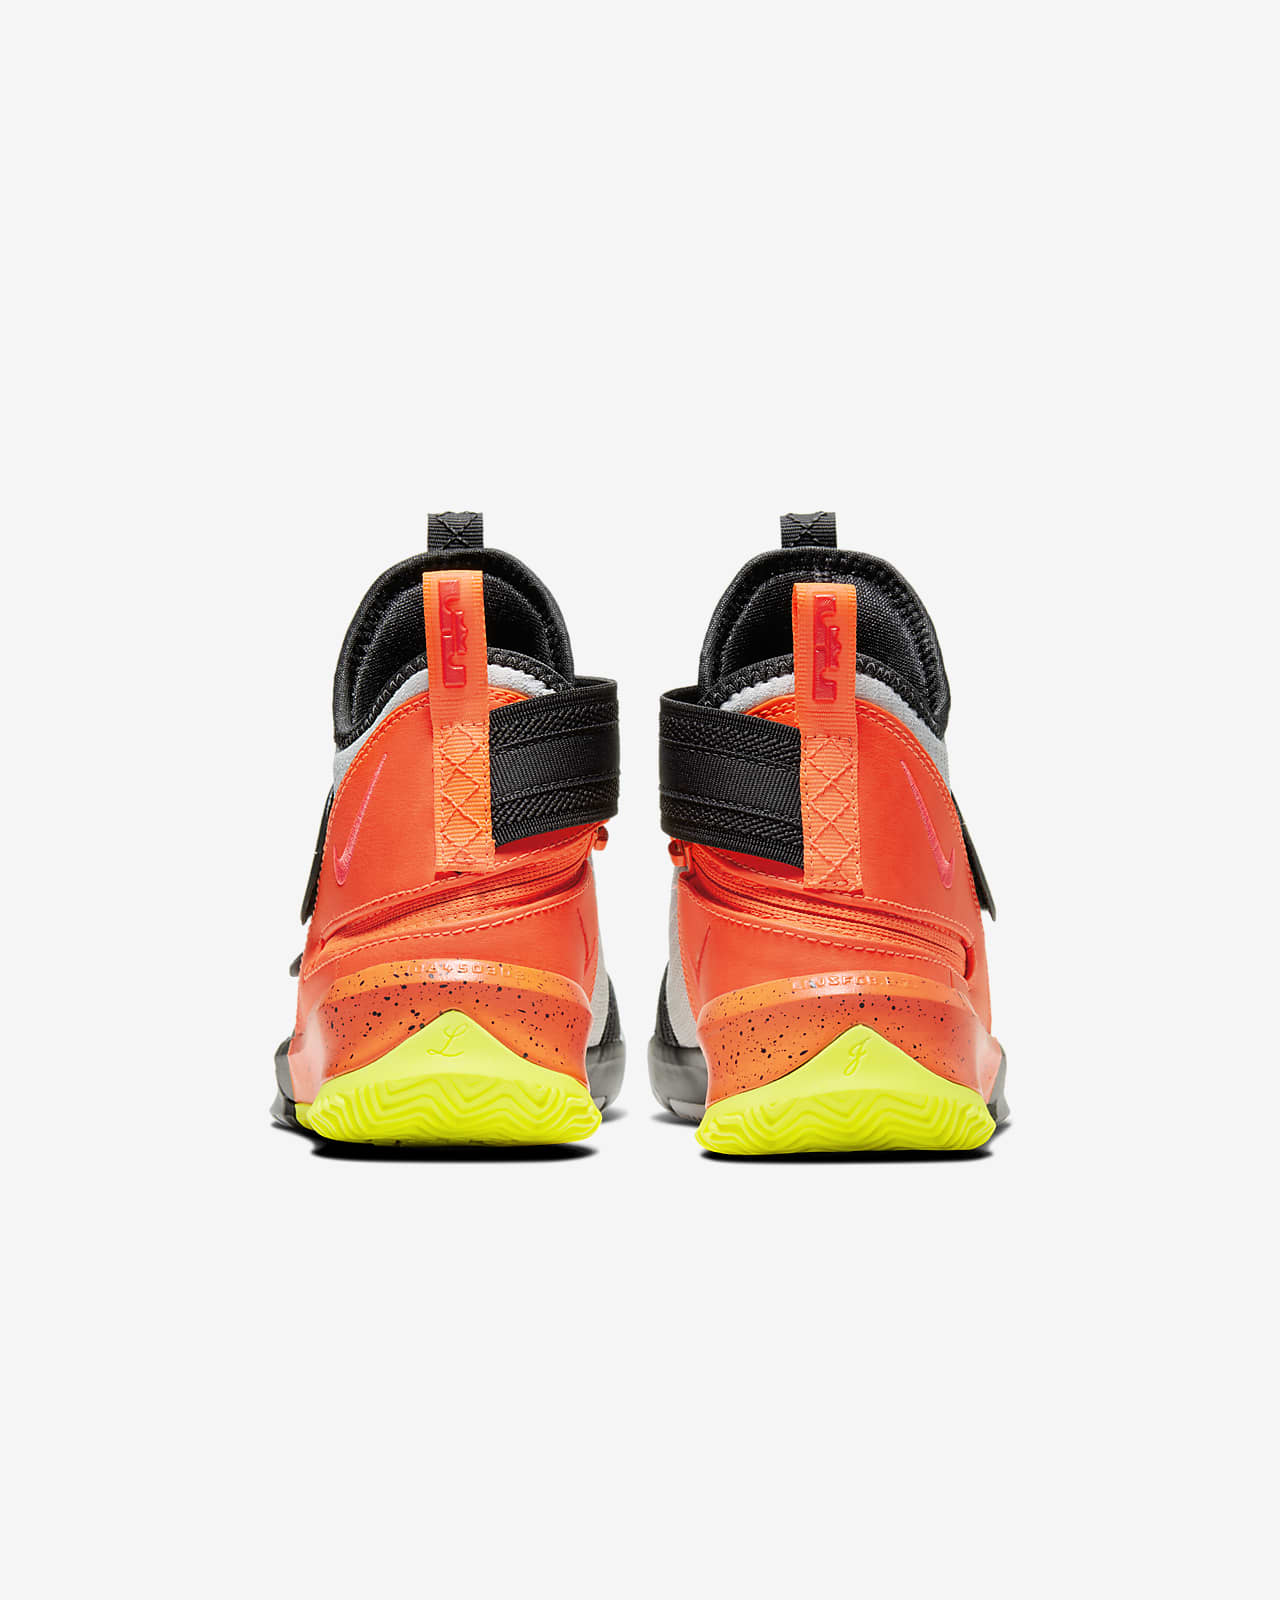 lebron soldier 13 sfg basketball shoes youth